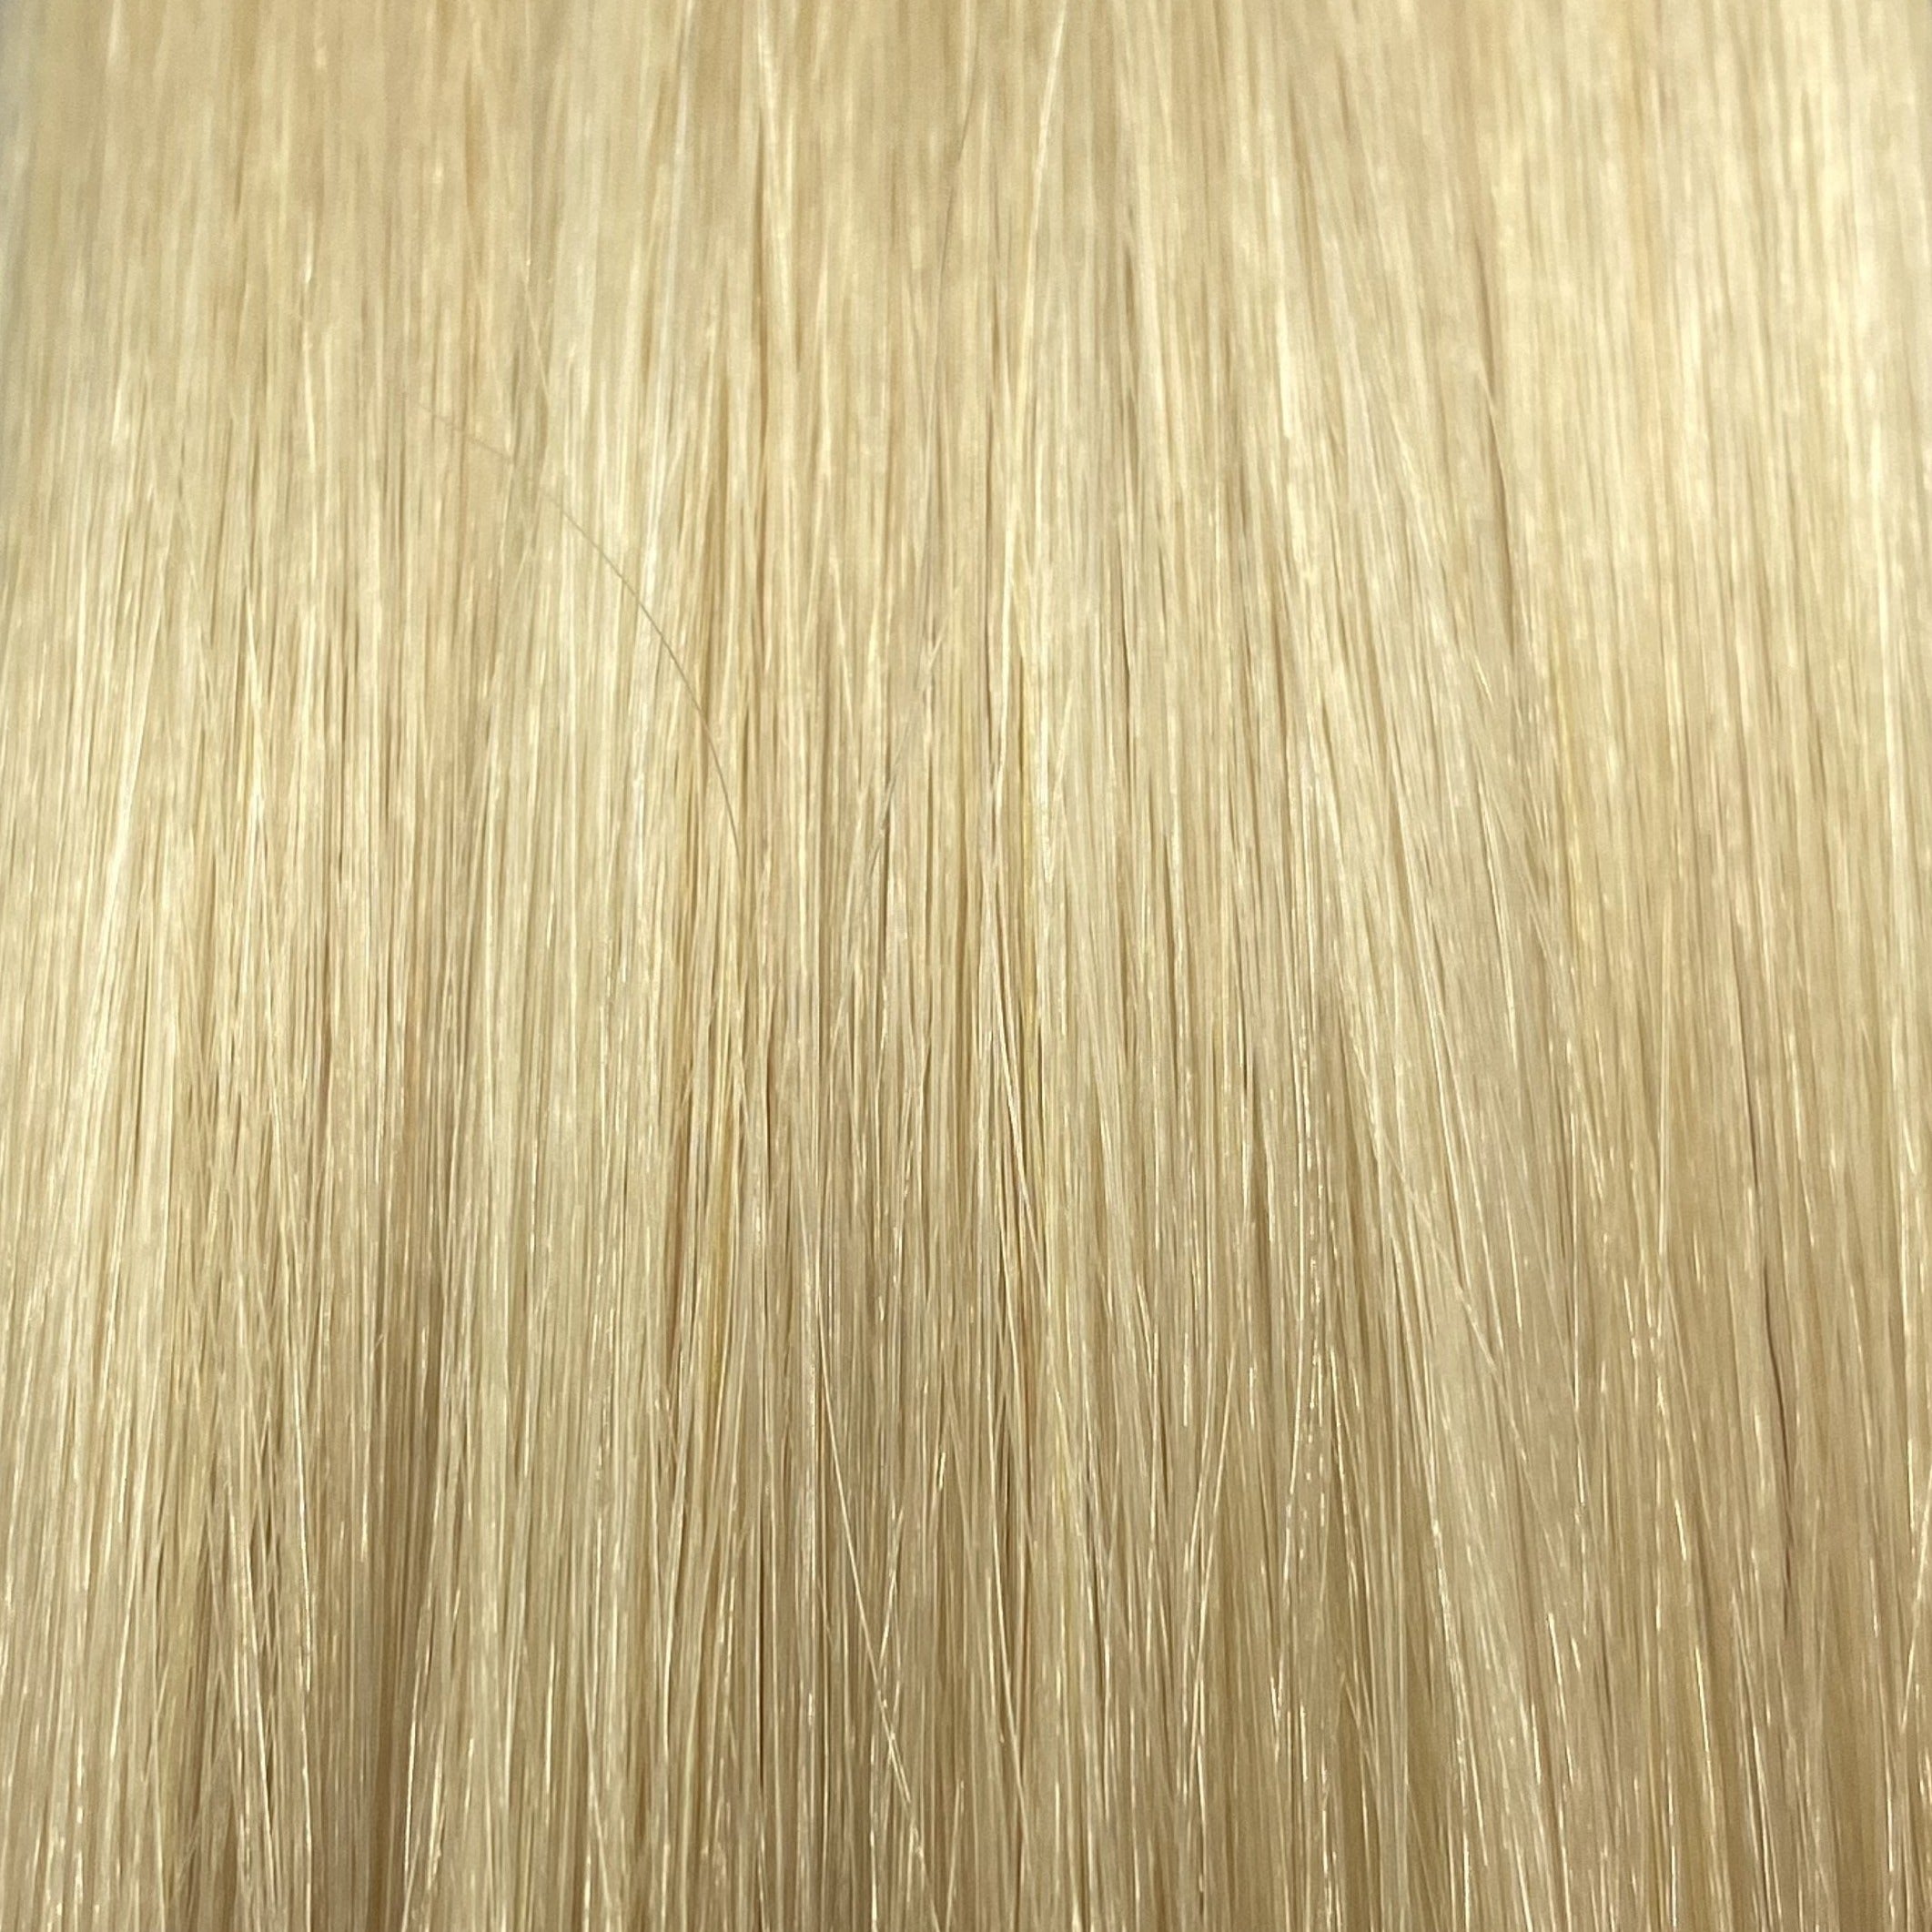 FUSION #1002 VERY LIGHT ASH BLONDE 60CM/ 24 INCHES  -  25 GRAMS - Image 1